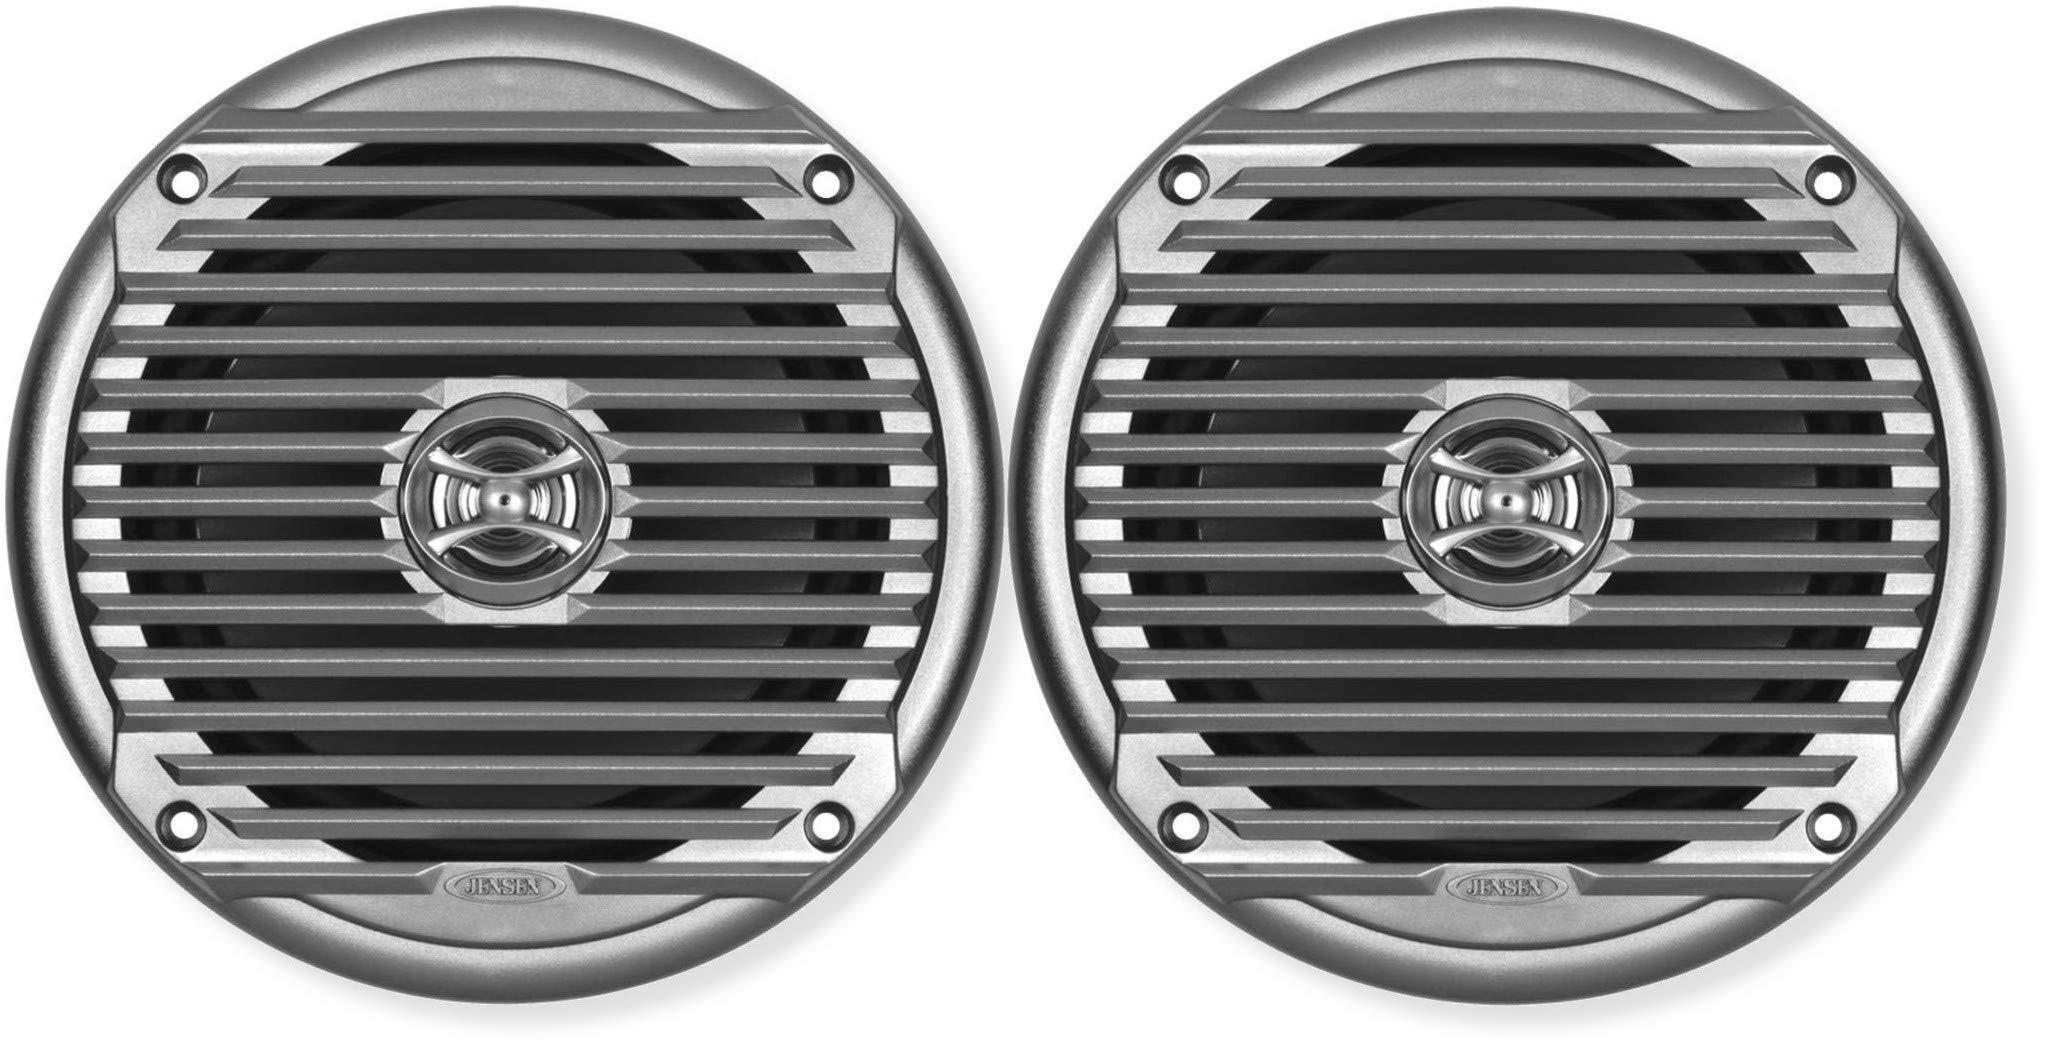 jensen ms6007sr pair of 6.5" coaxial waterproof silver speakers, 60 watts max power, frequency response 65hz-20khz, nominal i